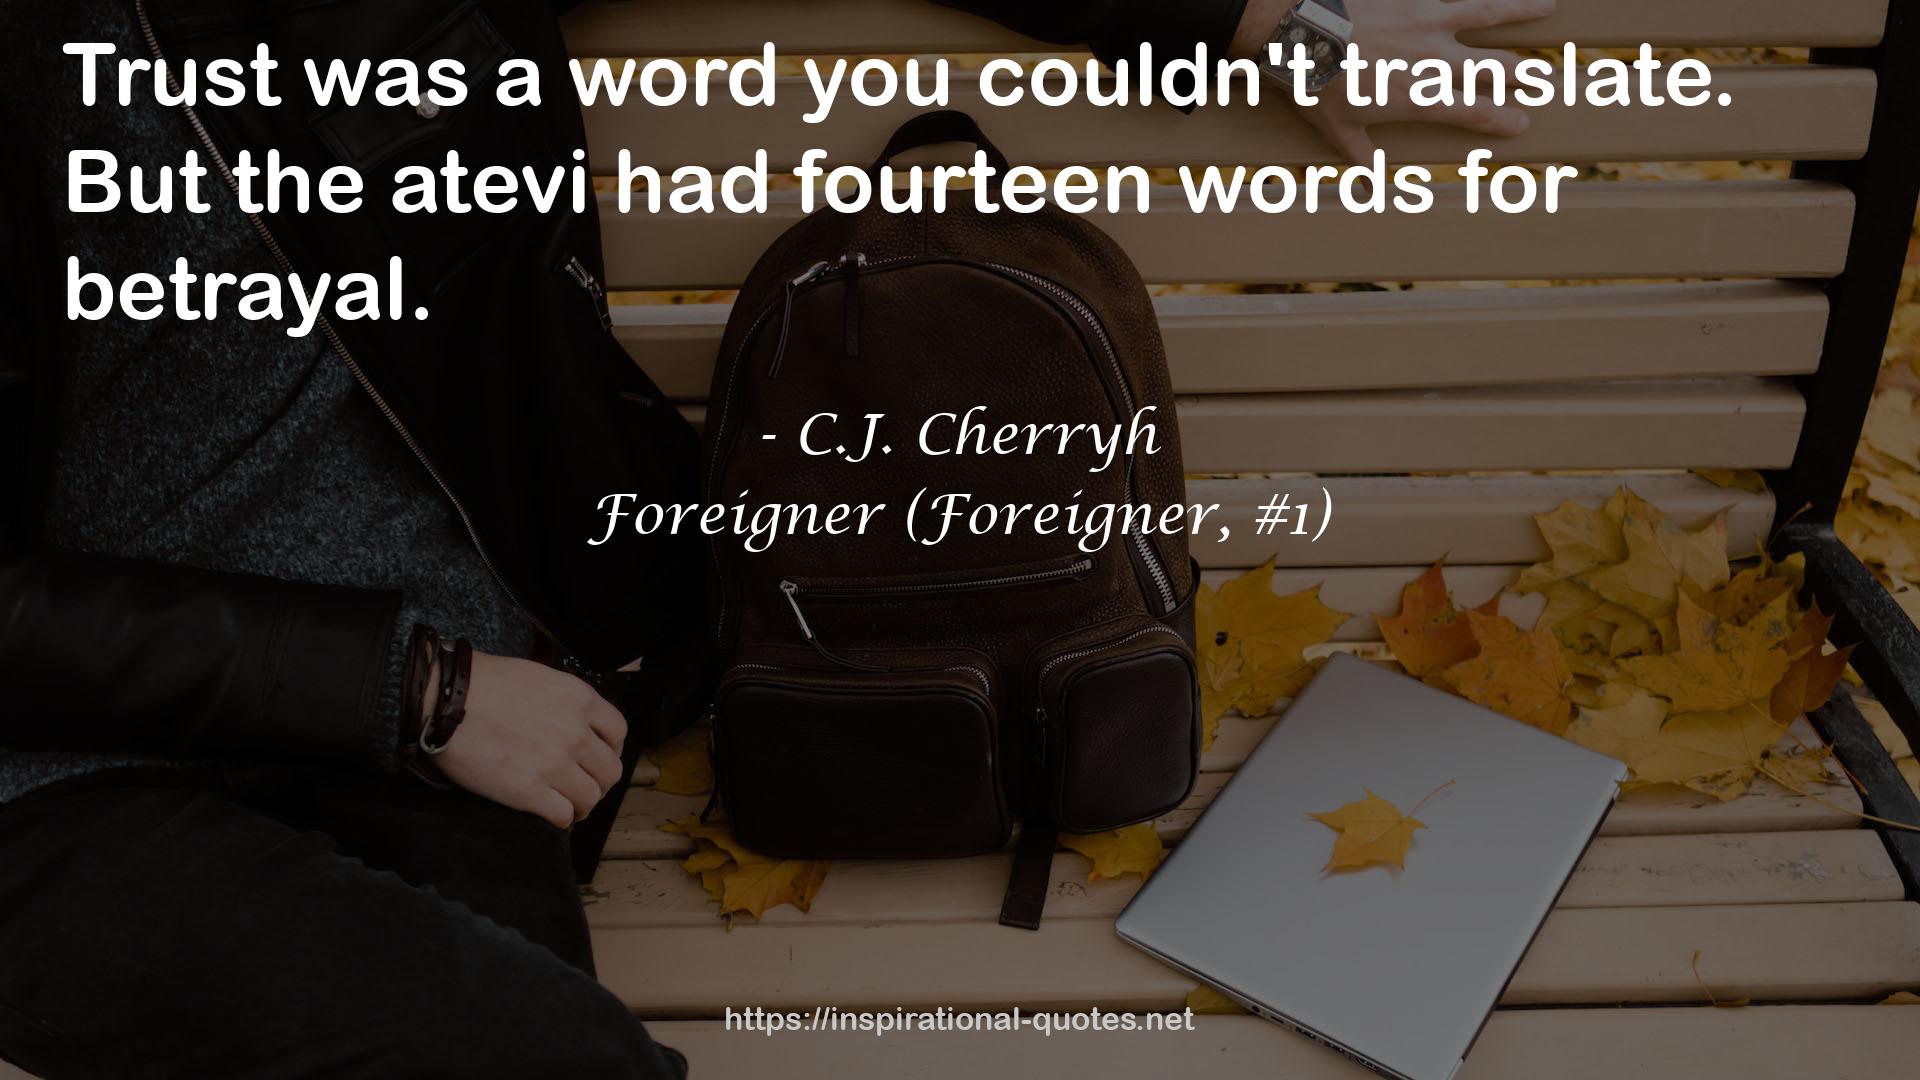 Foreigner (Foreigner, #1) QUOTES